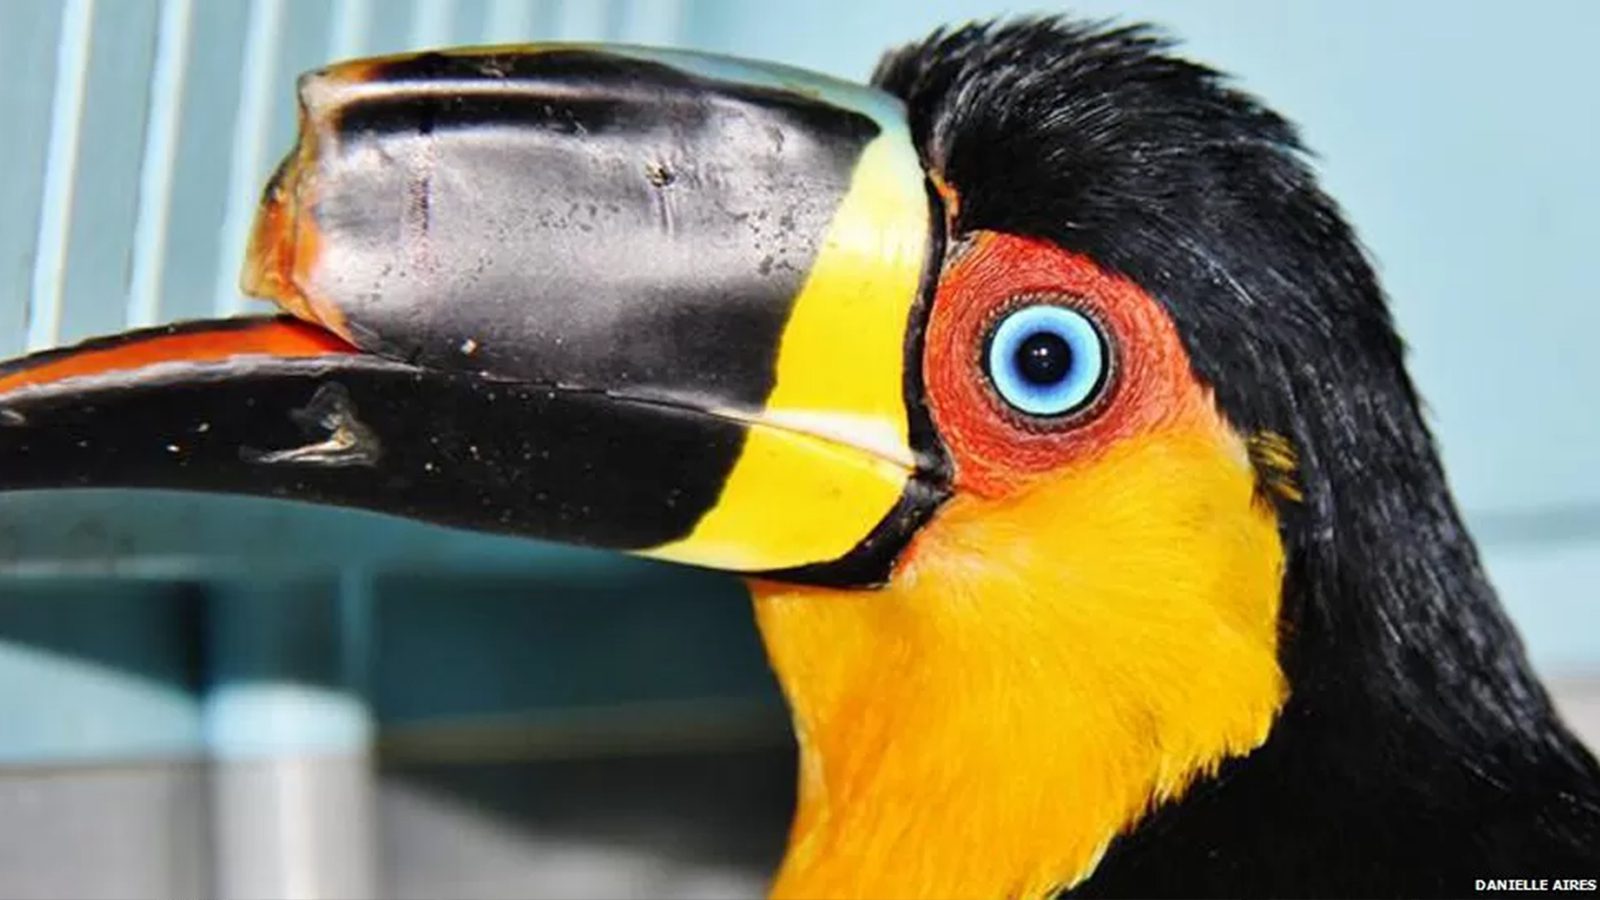 This Injured Toucan Received a 3D Printed Prosthetic Beak